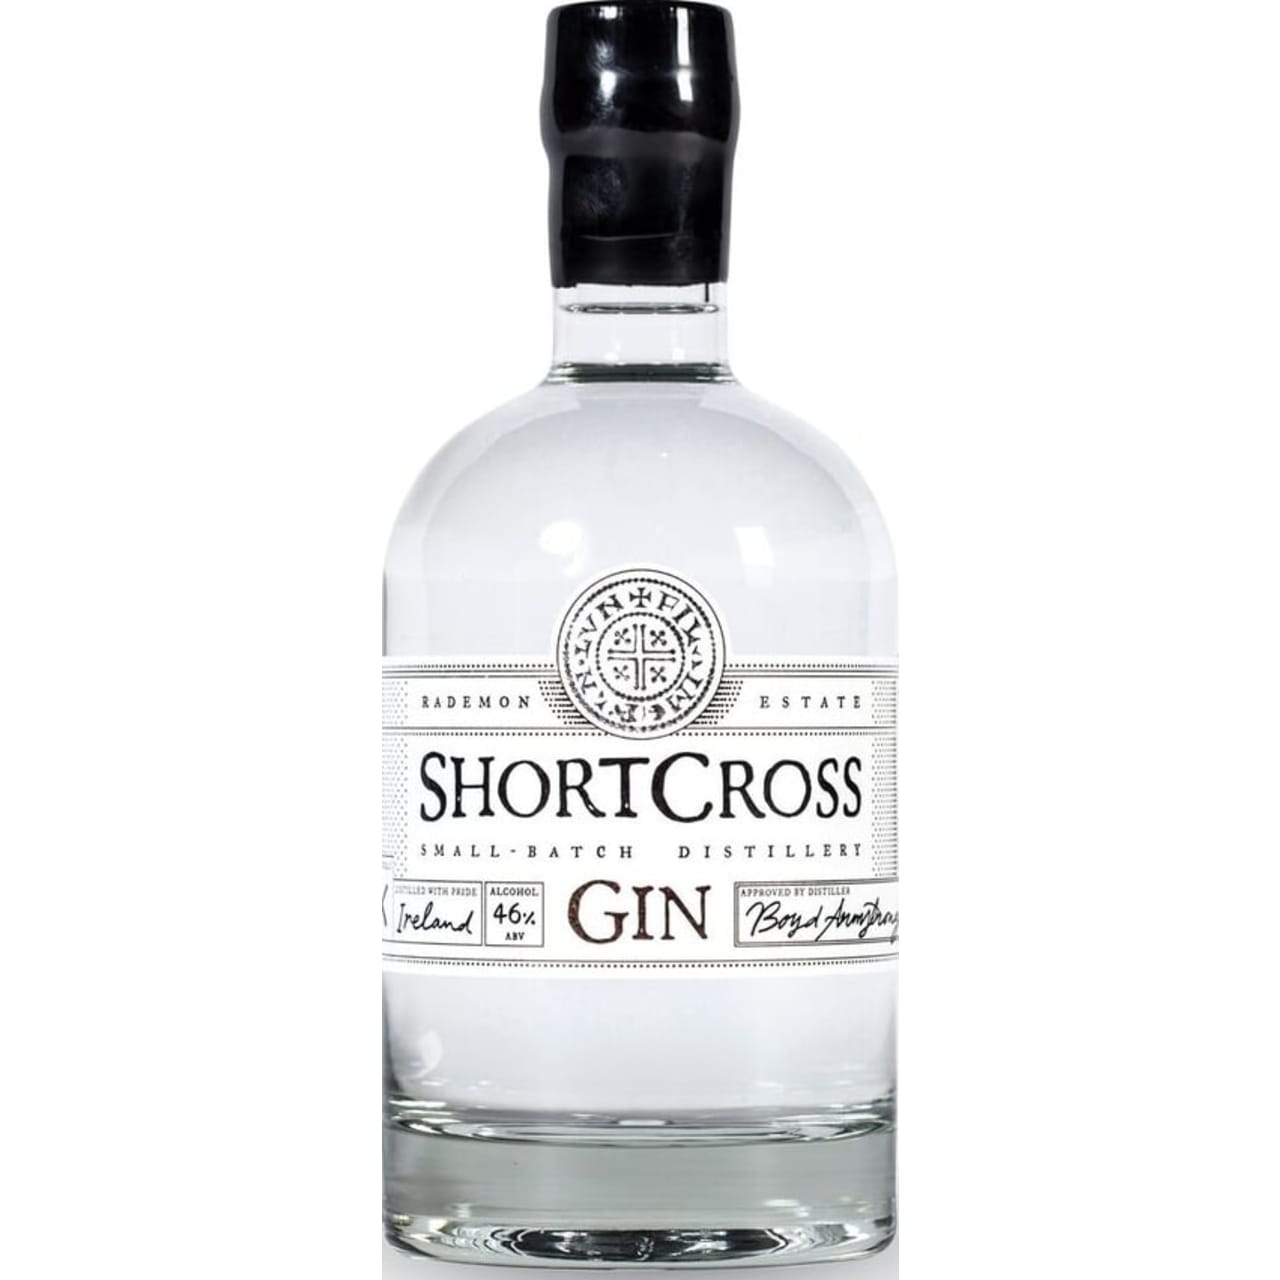 Ireland's Most Awarded Gin, Shortcross Gin, is classical juniper-forward style with a unique twist; uplifting floral notes, smooth and sweet flavours and an exceptionally long finish Inspired by the lush forests and gardens surrounding the distillery on Rademon Estate in Northern Ireland.